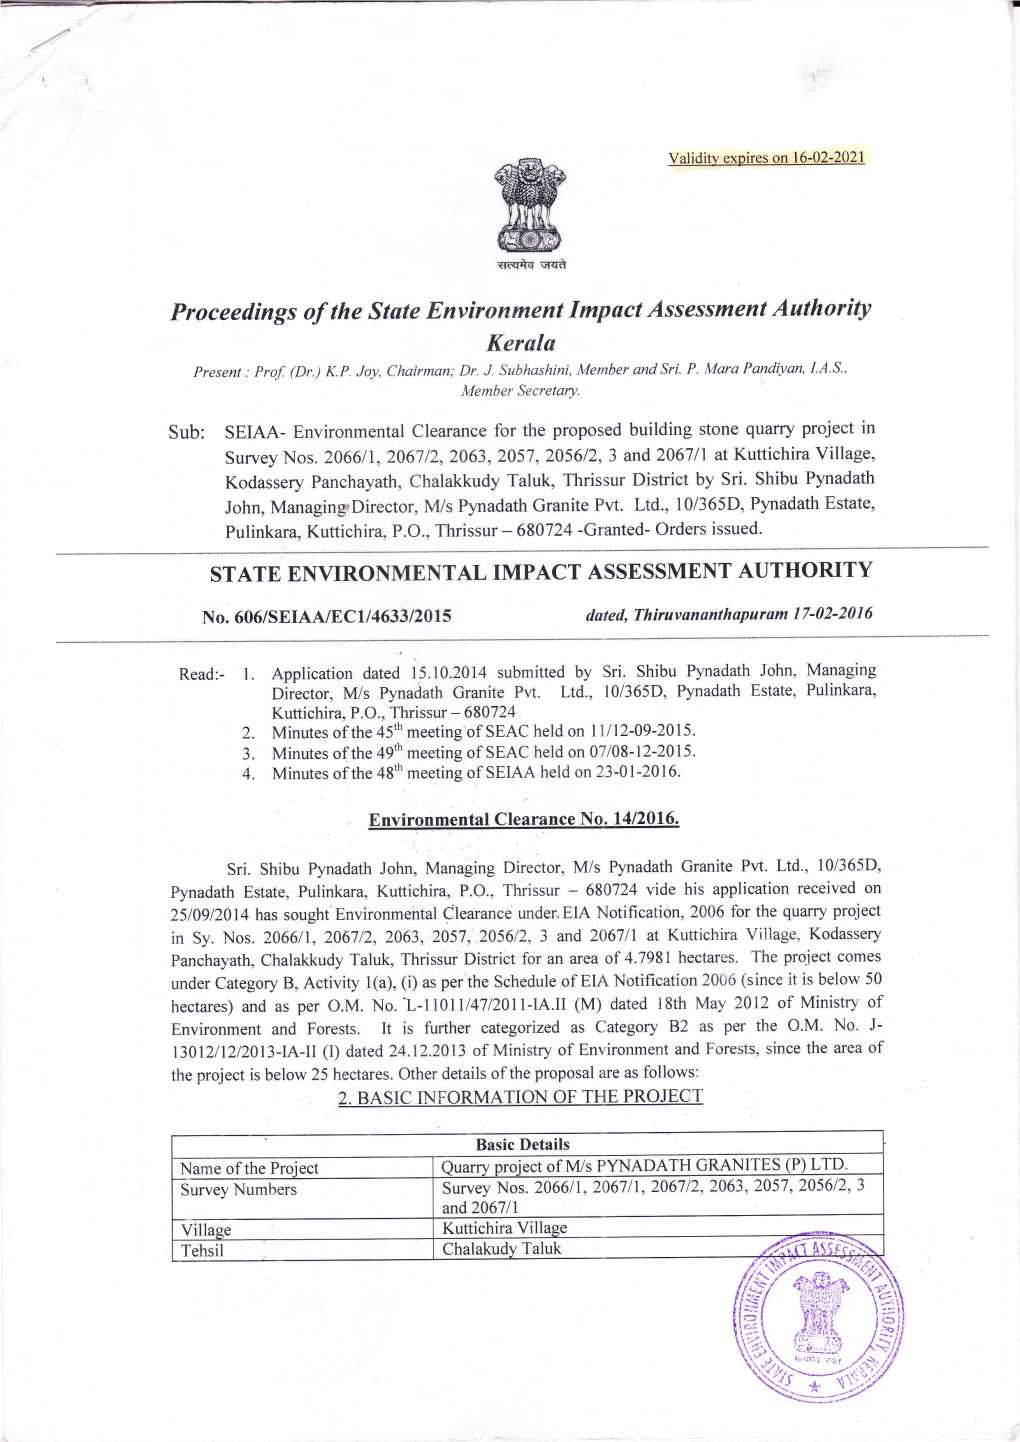 Environmental Clearance for the Proposed Building Stone Quarry Project in Survey Nos